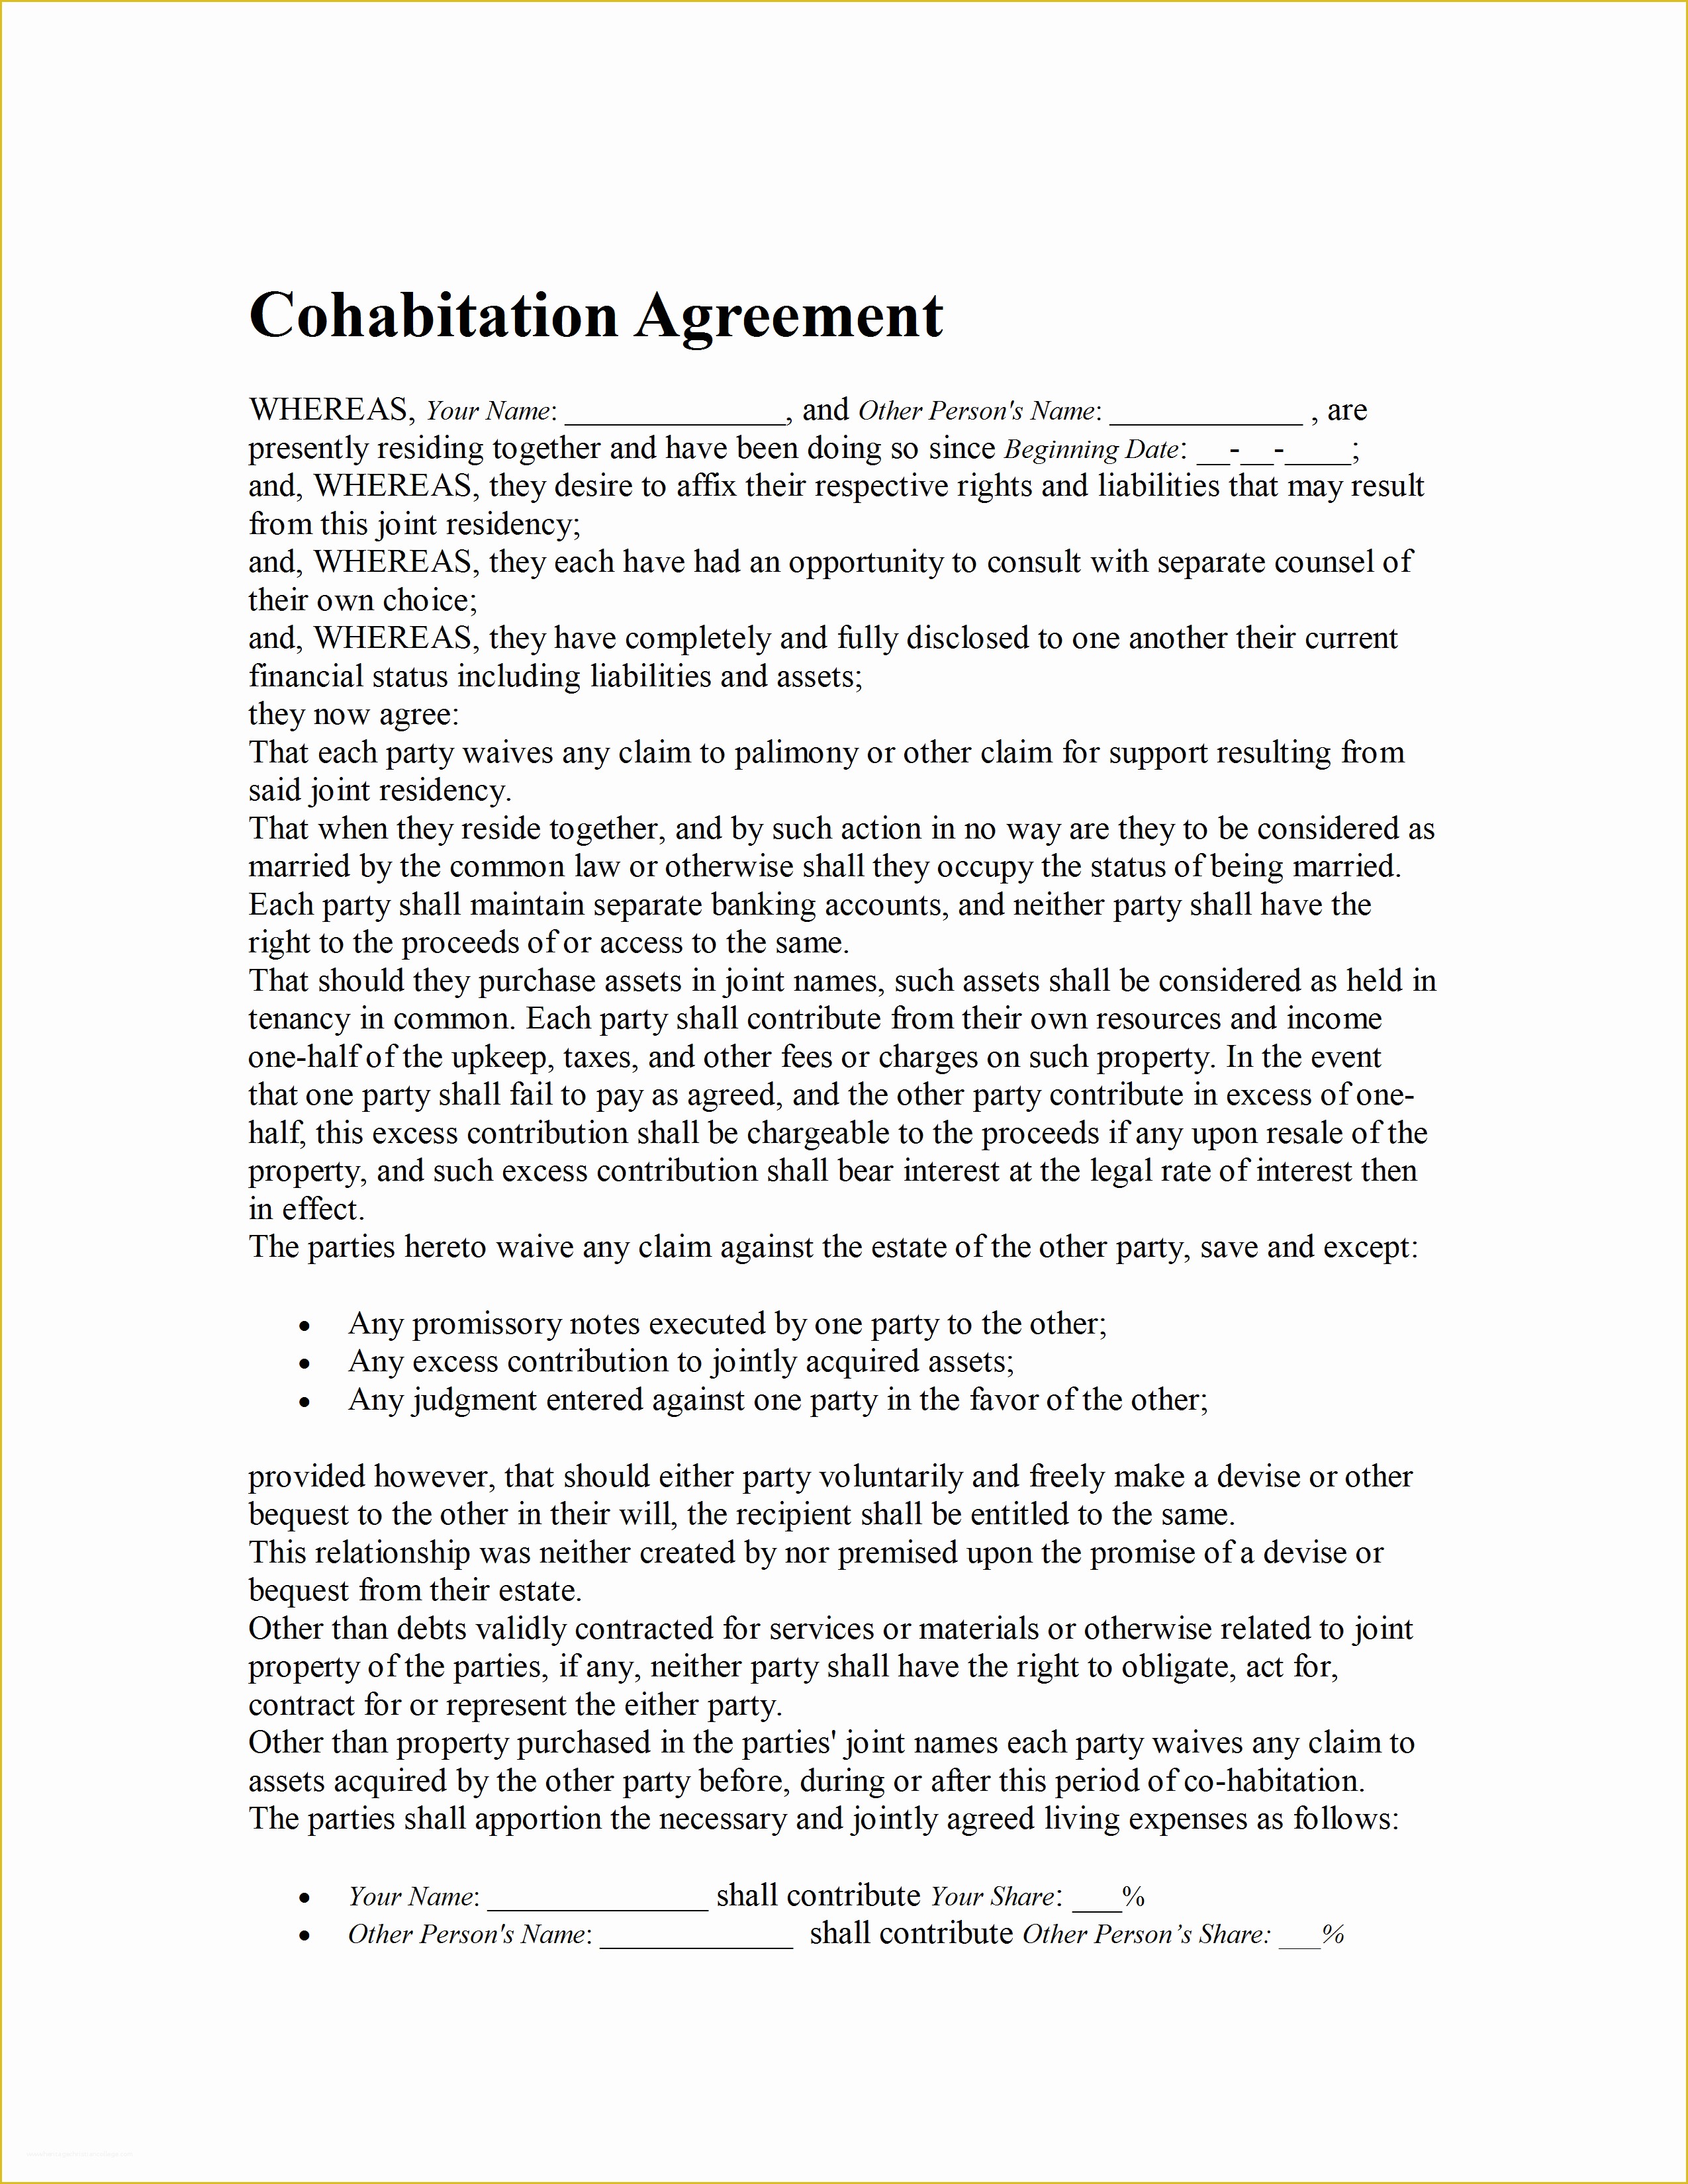 Living together Agreement Template Free Of Cohabitation Agreement Template